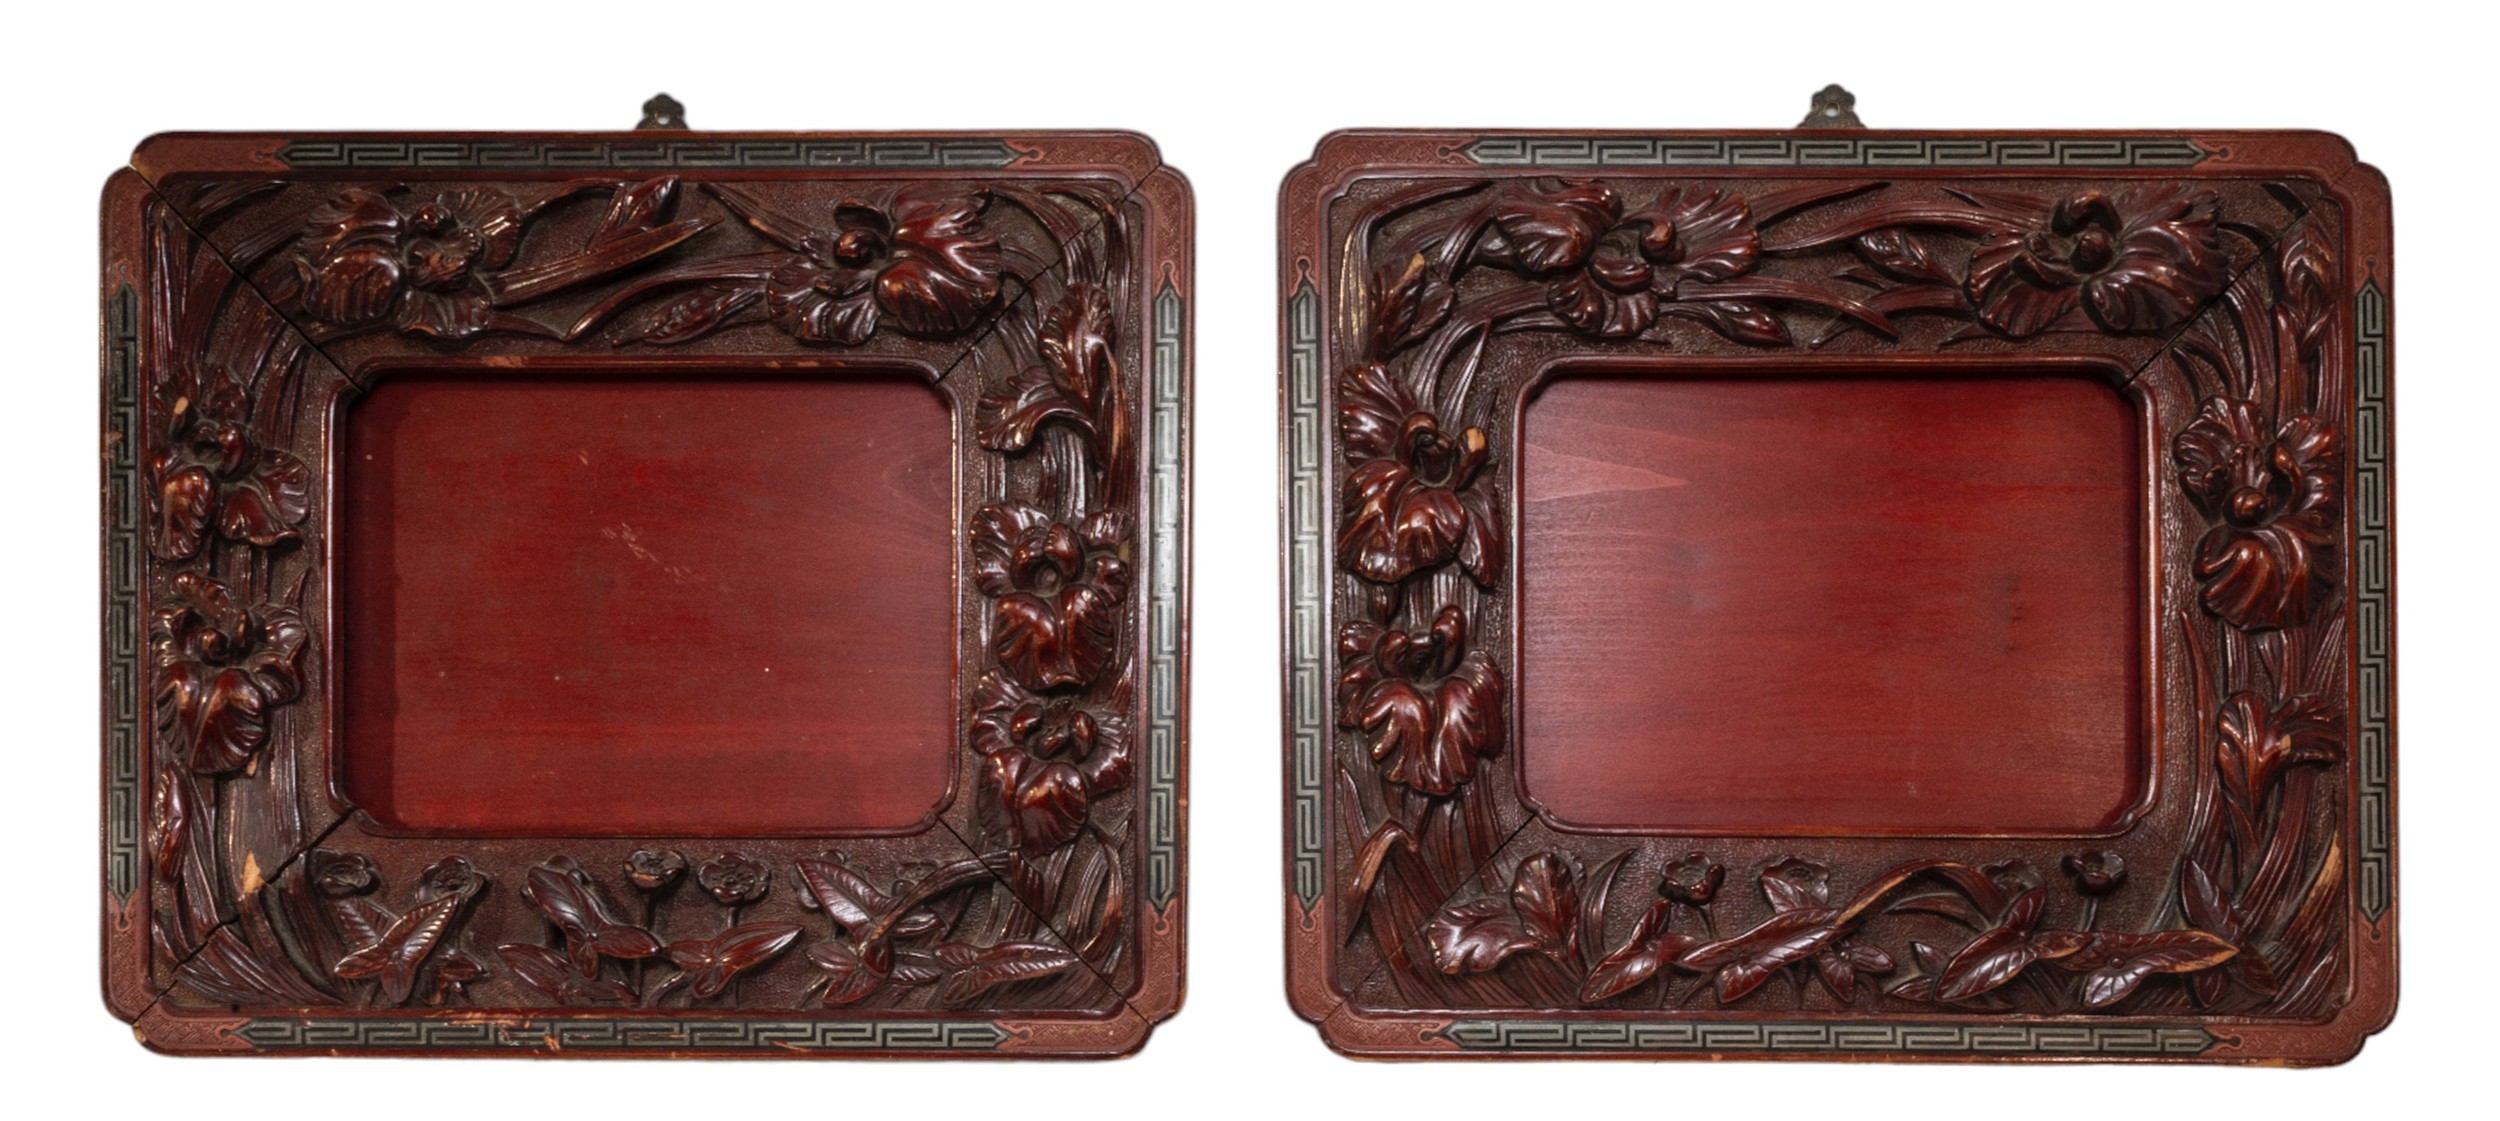 A PAIR OF CHINESE PICTURE FRAMES, 19TH CENTURY, rectangular form, carved in relief with flowering